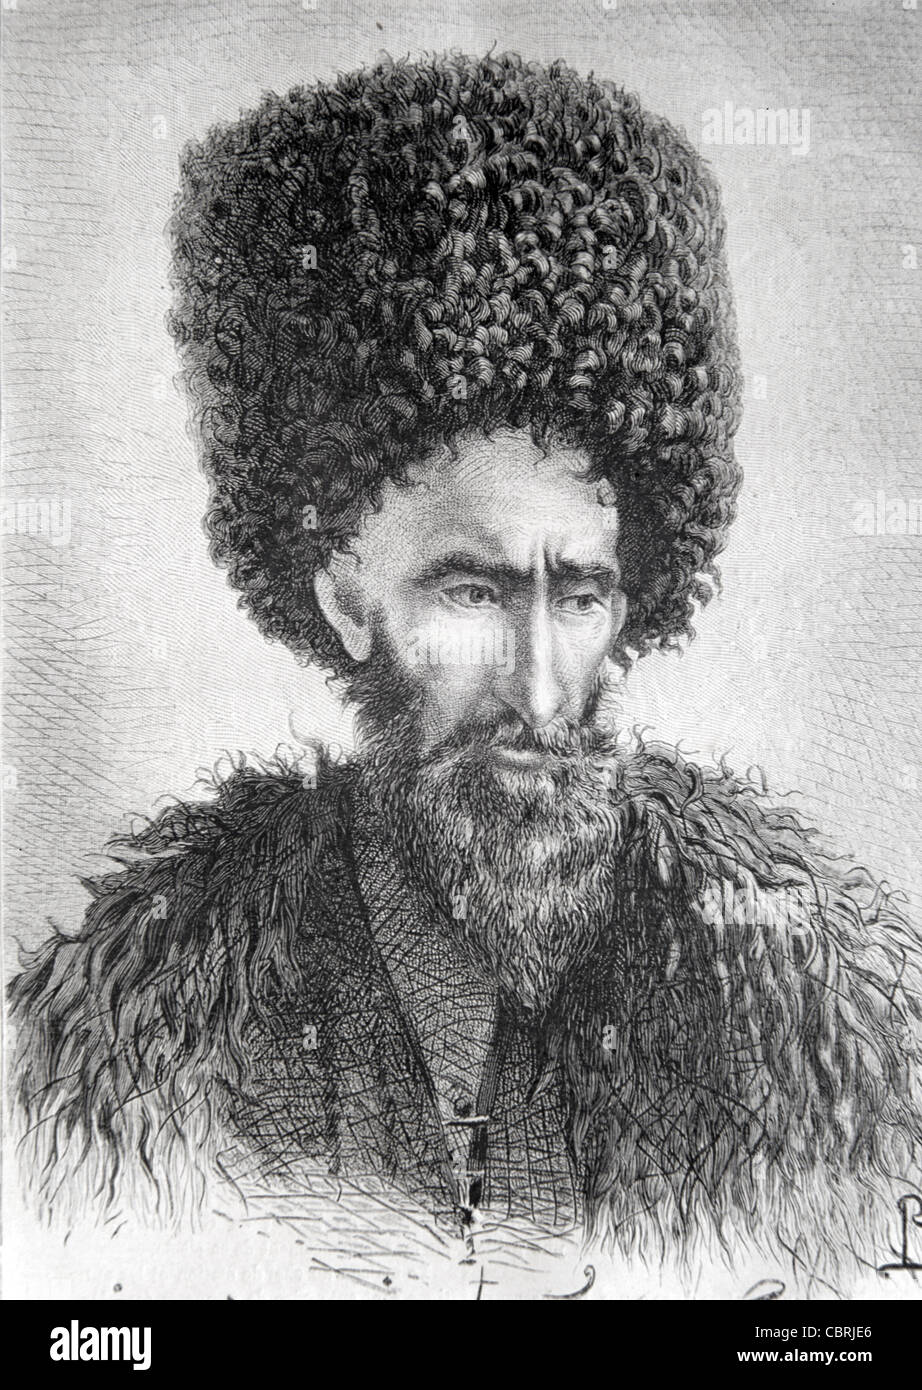 Hadji Mourtouz, Chief or Leader of Dagestan in Revolt Against Russia (1861) during the Caucasian War (1817-1864) Vintage Illustration or Engraving Stock Photo